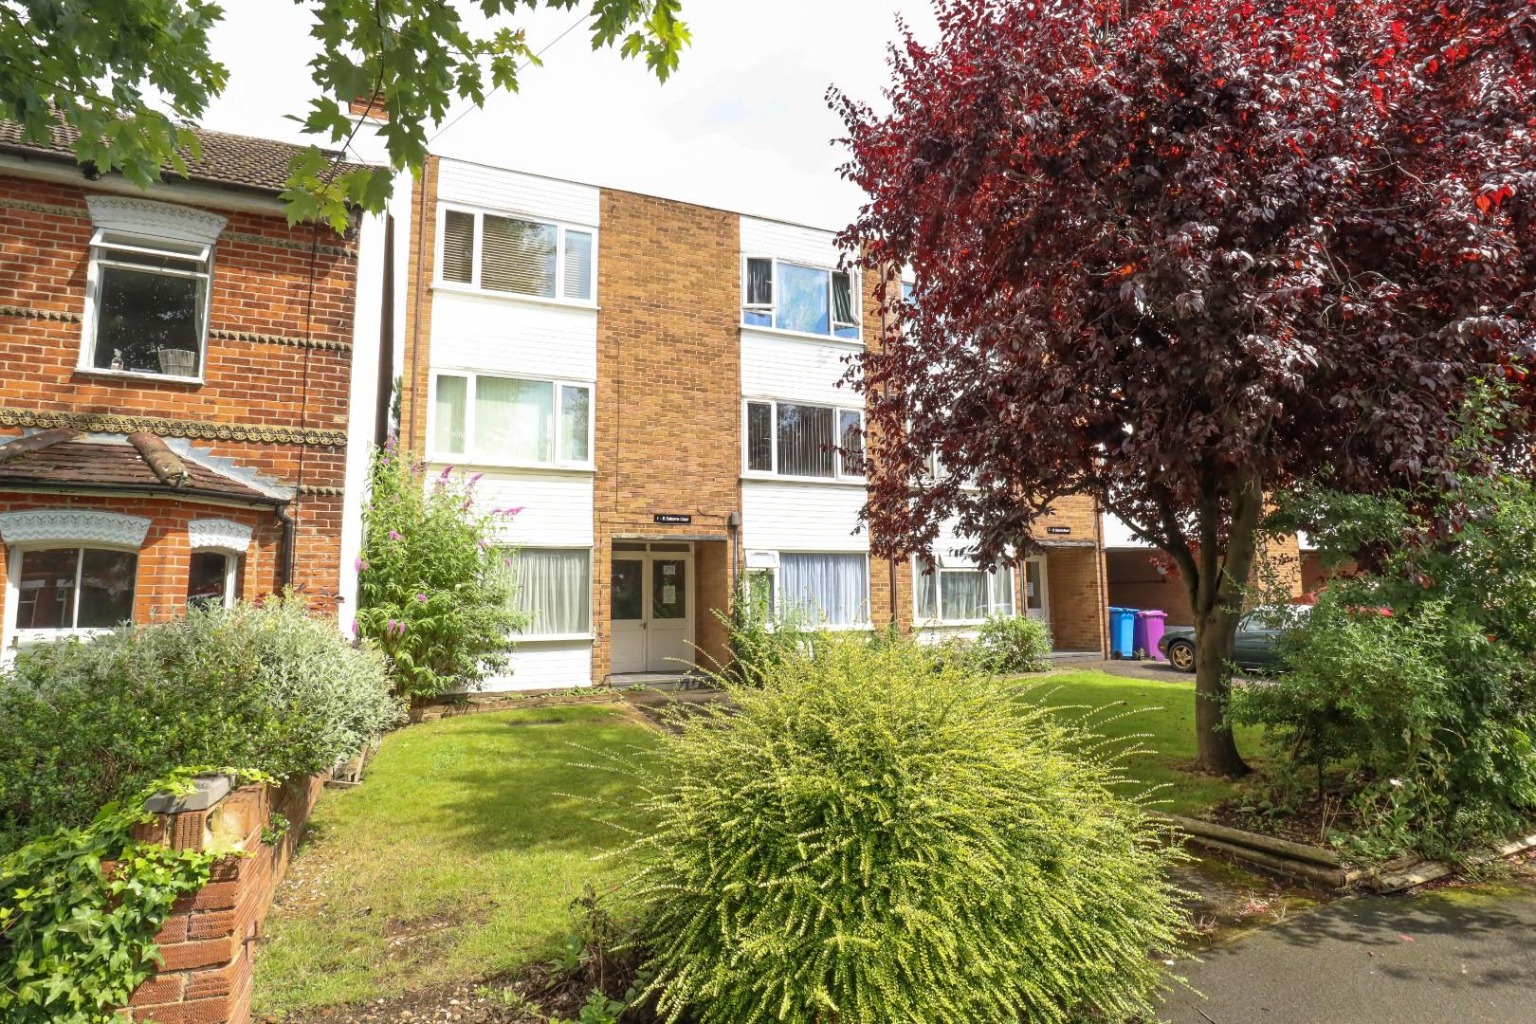 *MARKETED BY CHRIS GRAY* This is a perfect first time, or investment buy!  A ground floor one bedroom apartment presented in excellent condition having undergone recent improvement.